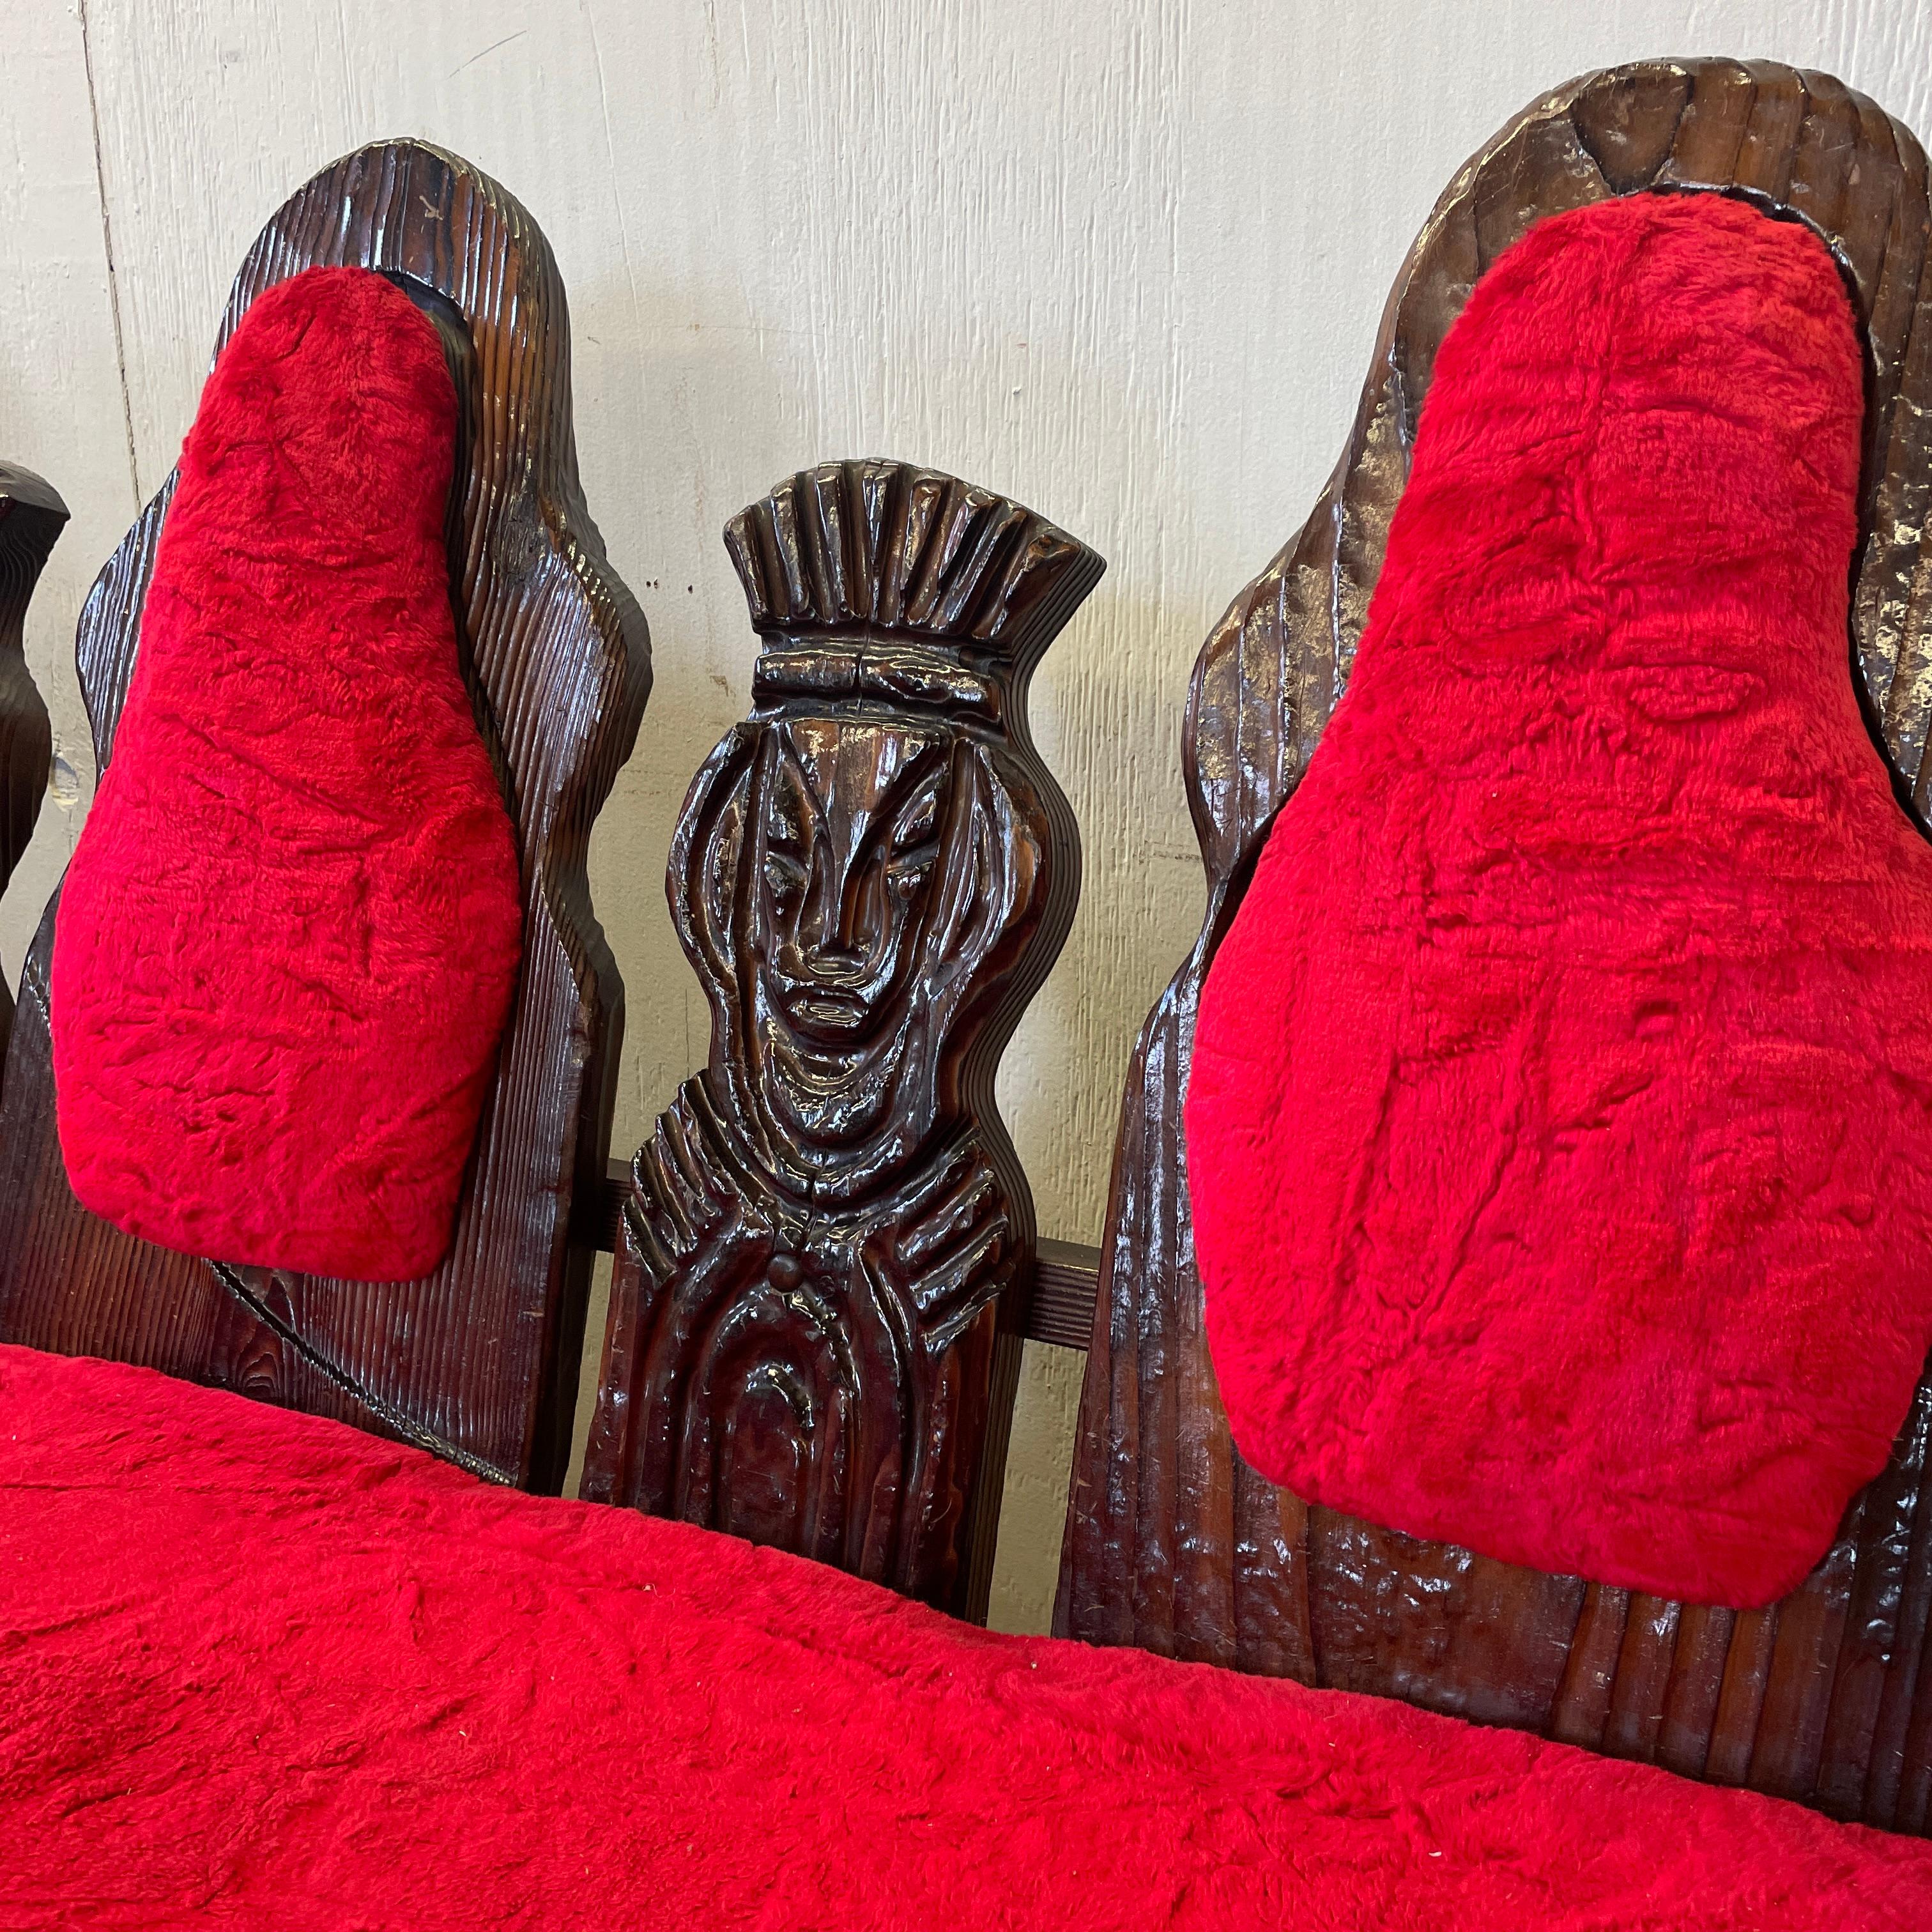 An intricate wooden tiki Witco three seater sofa. Excellent condition. No stains or tears. Robert Post Junior and Artist William Westenhaver created Witco in 1959. The delightfully dramatic furniture was so beloved during the period that Elvis